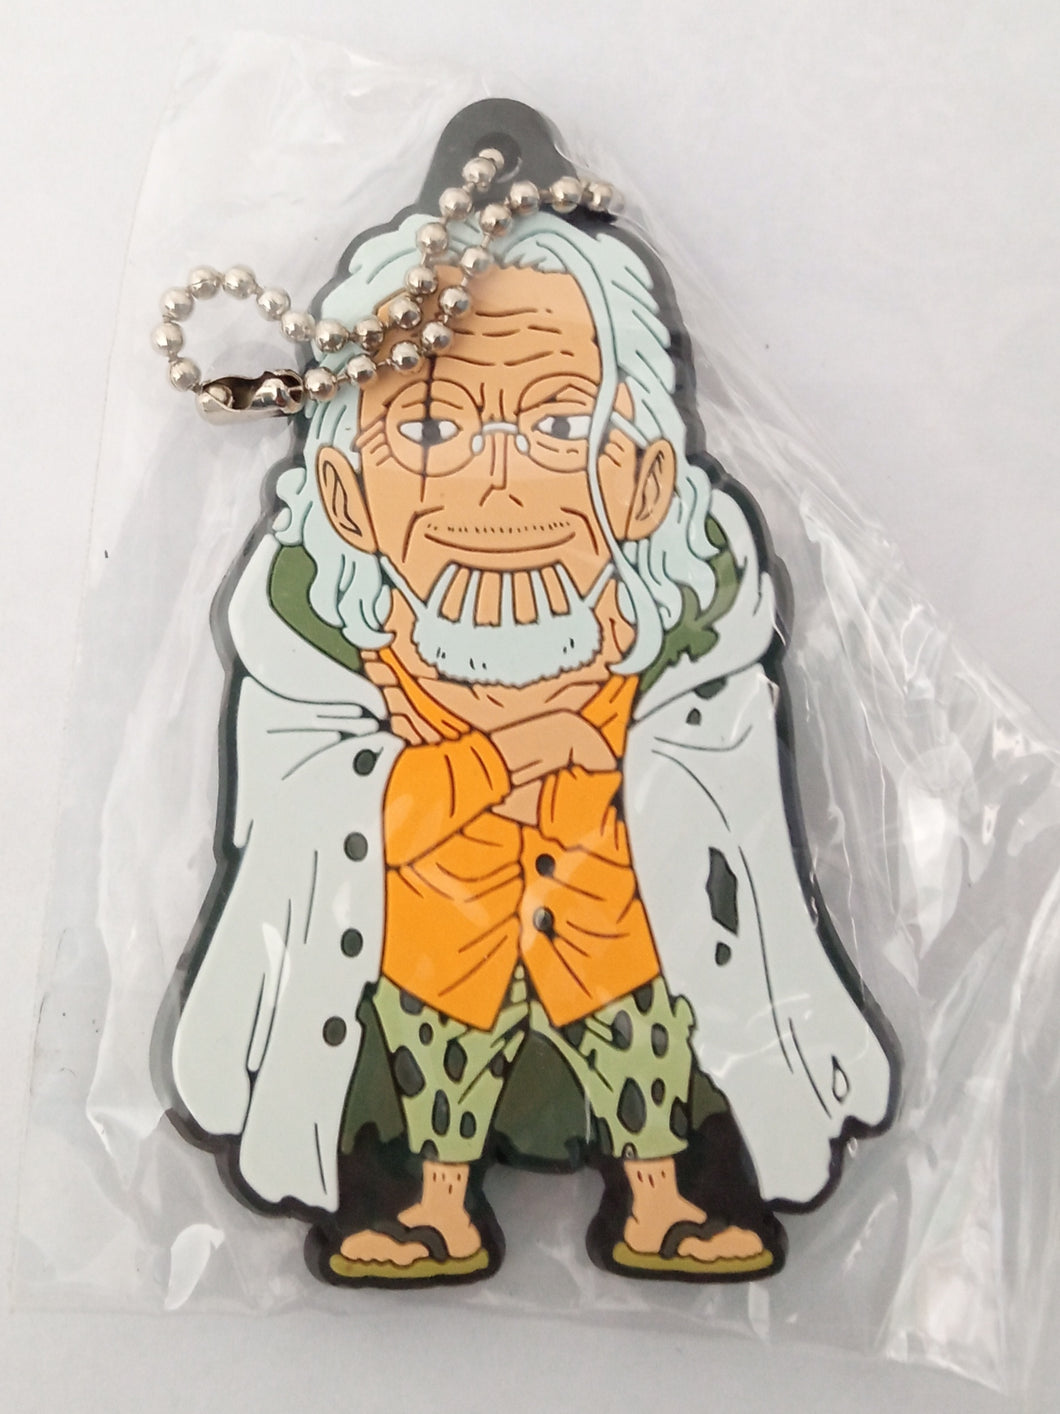 One Piece RAYLEIGH Rubber Strap Keychain Mascot Key Holder Charm